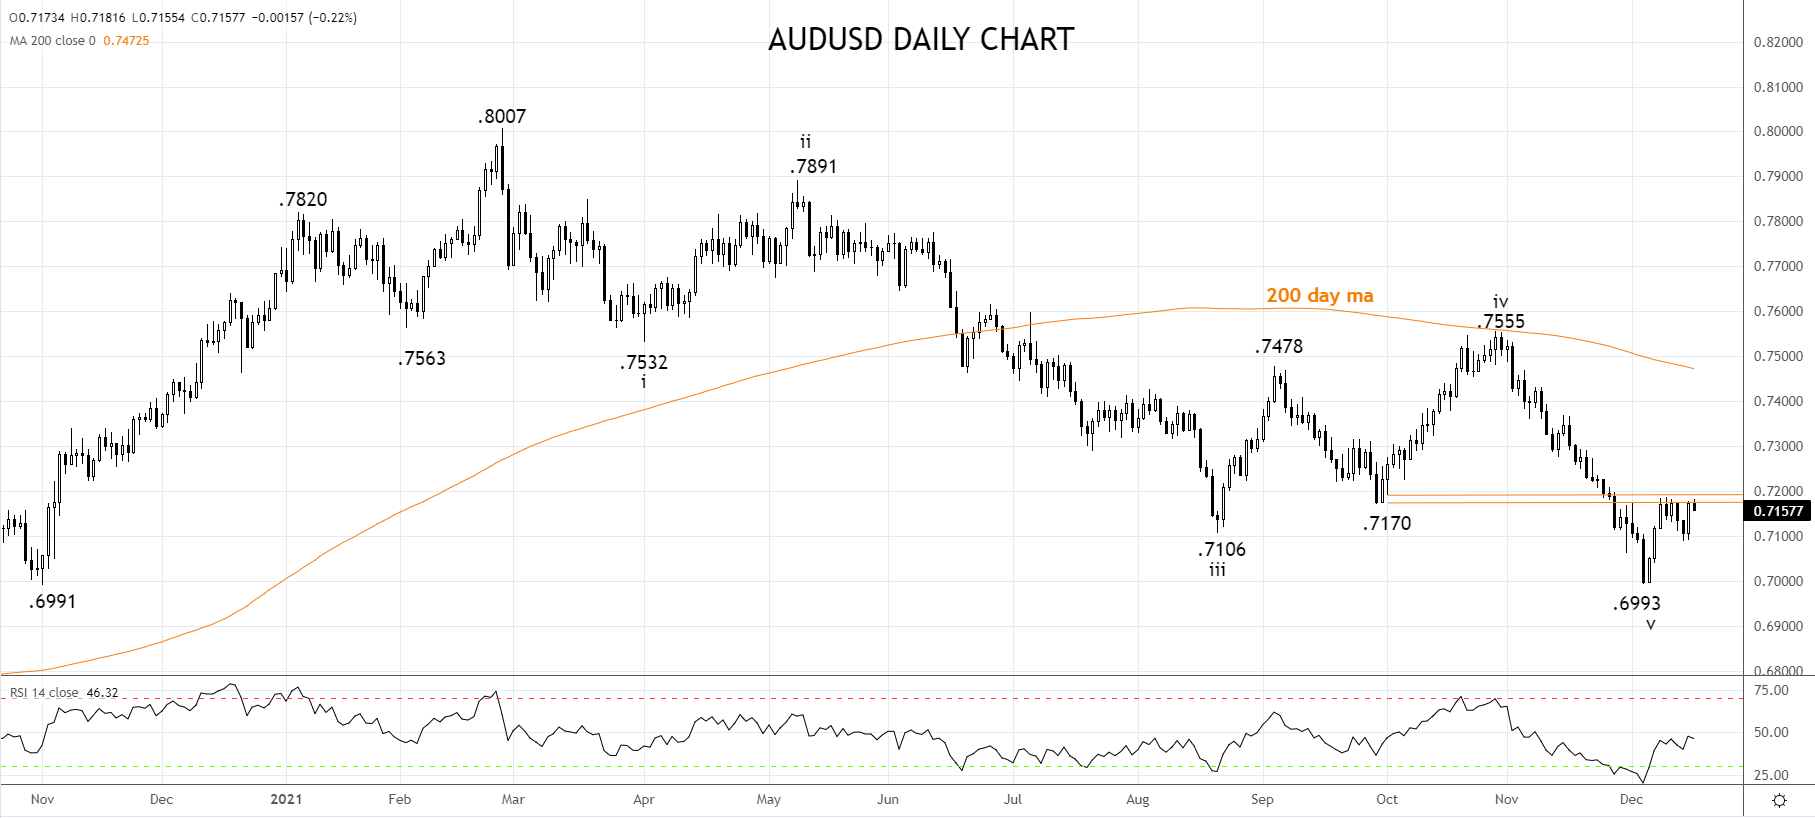 AUDUSD Daily Chart 16th of Dec